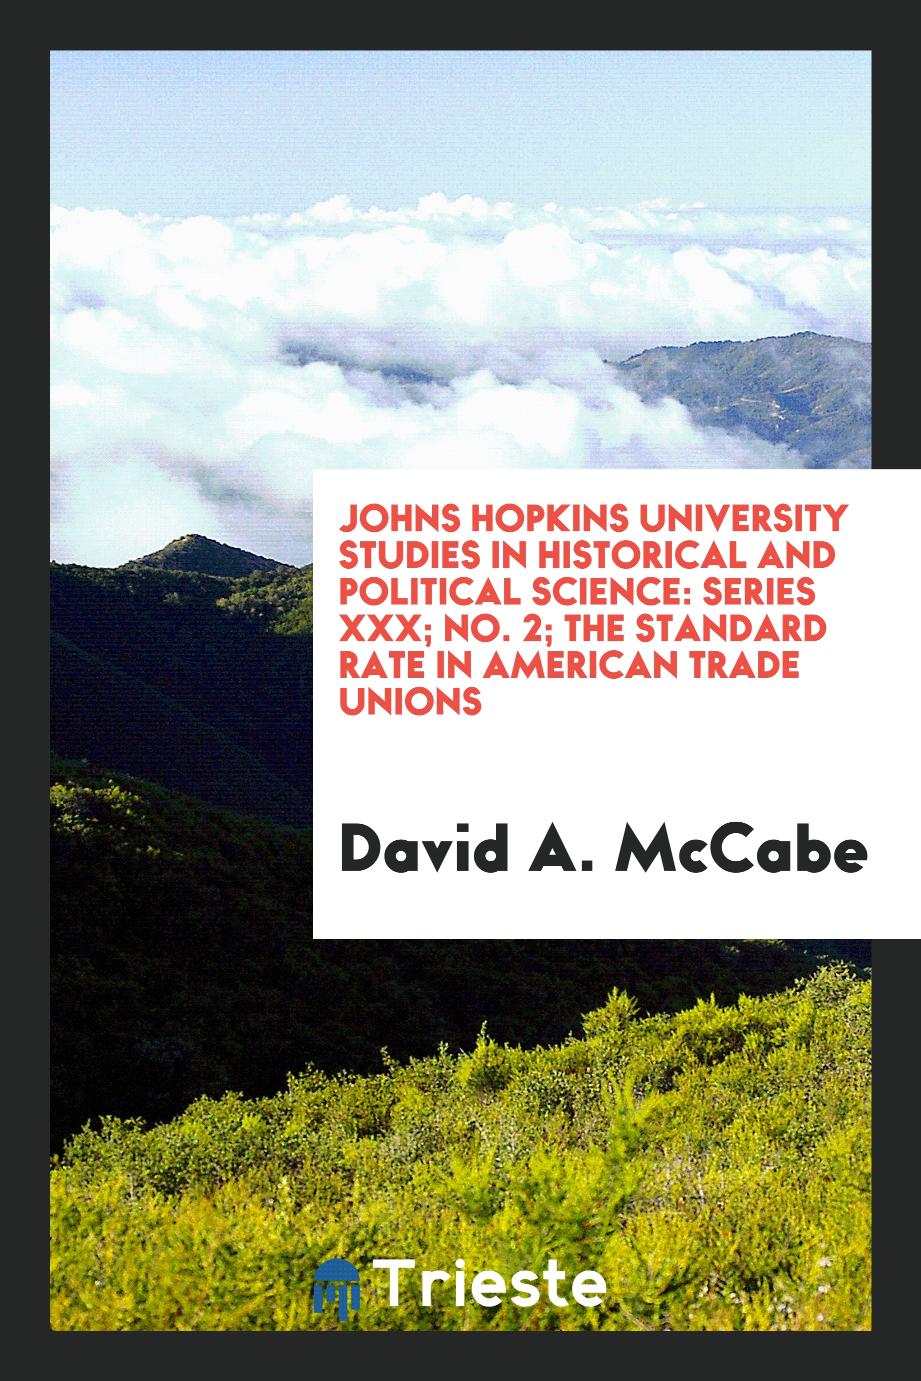 Johns Hopkins University Studies in Historical and Political Science: Series XXX; No. 2; The Standard Rate in American Trade Unions